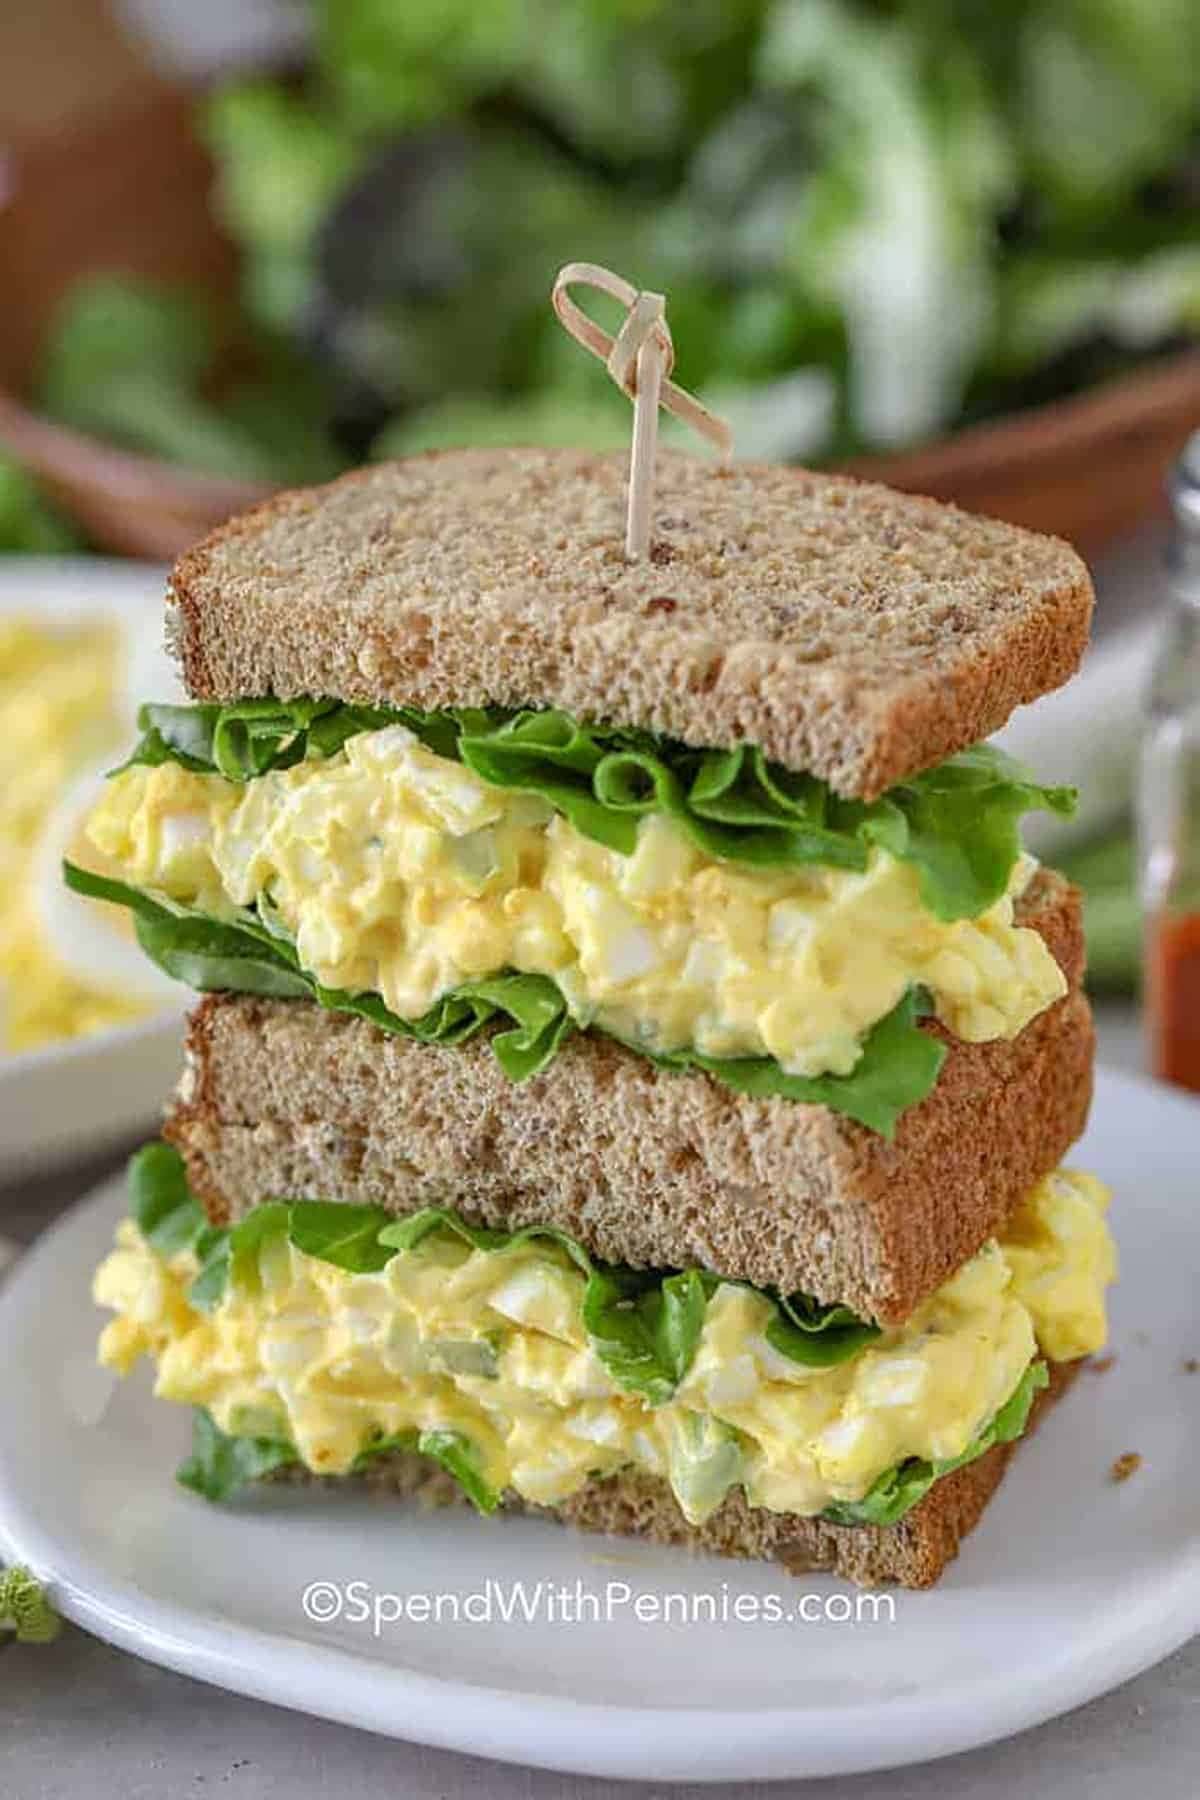 Sliced in half wheat bread sandwich with egg salad and lettuce filling.